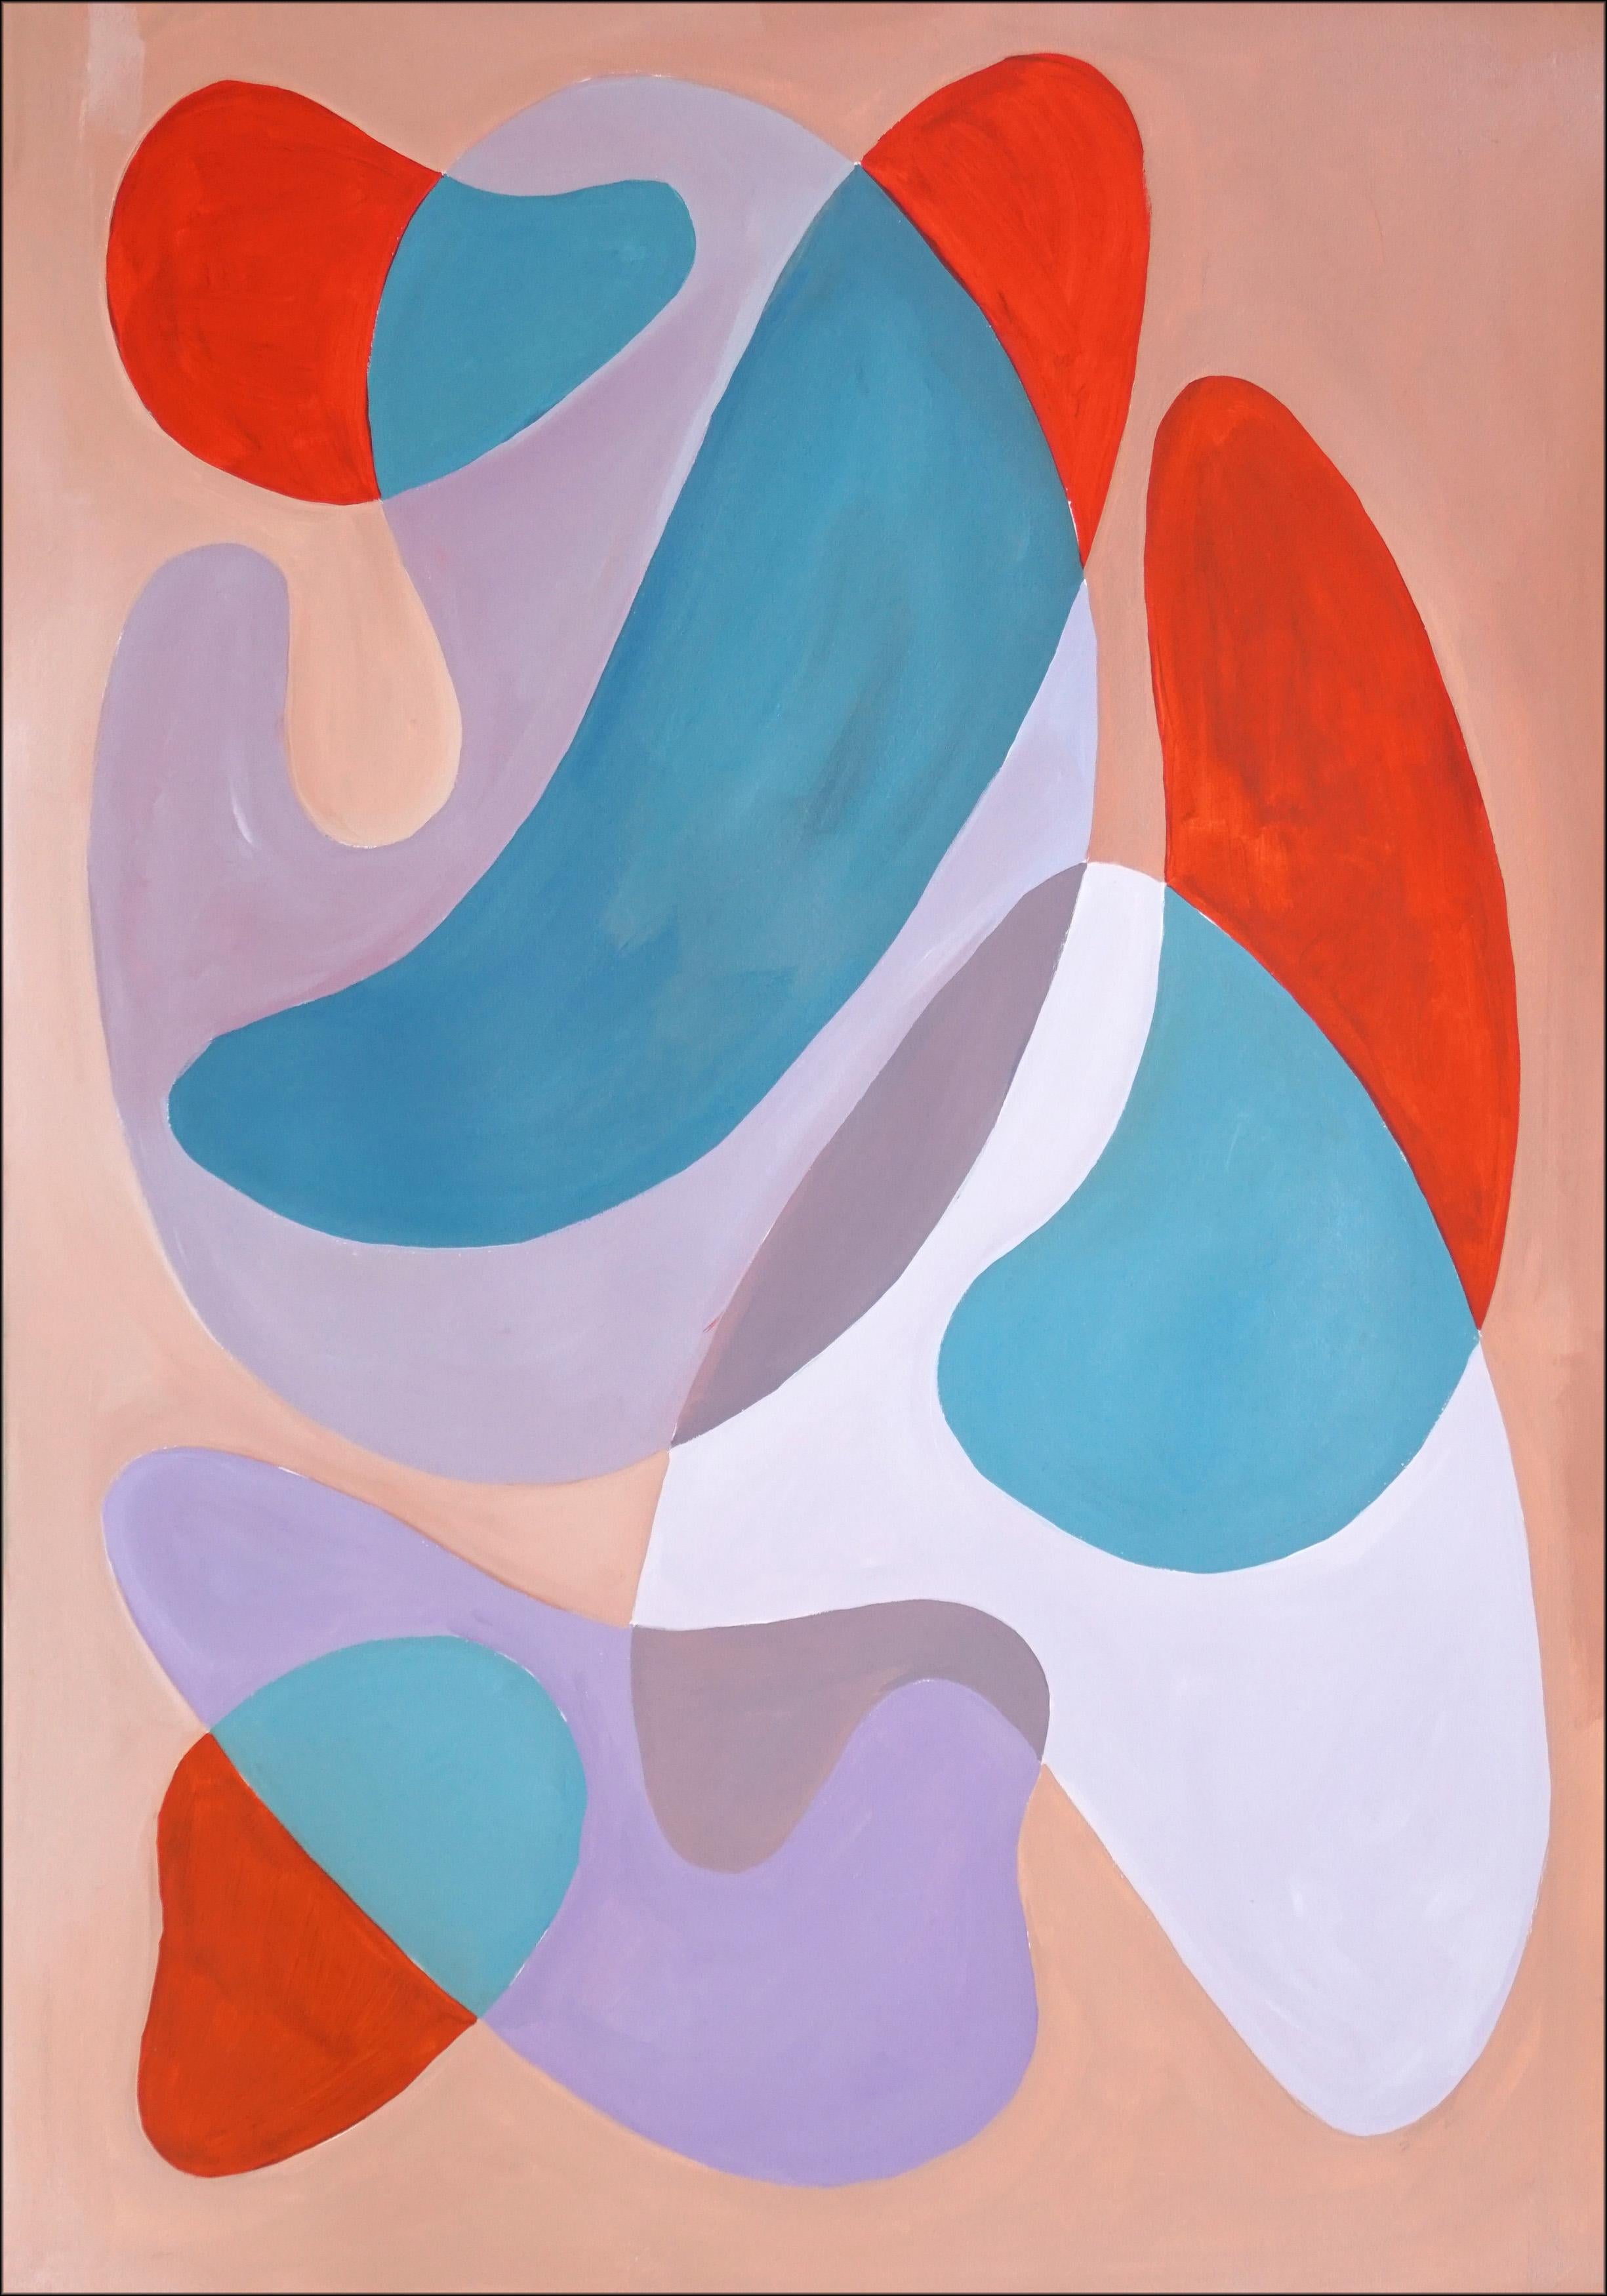 Ryan Rivadeneyra Portrait Painting - Modernist Palettes, Orange and Turquoise Mid-Century Floating Shapes, Abstract 